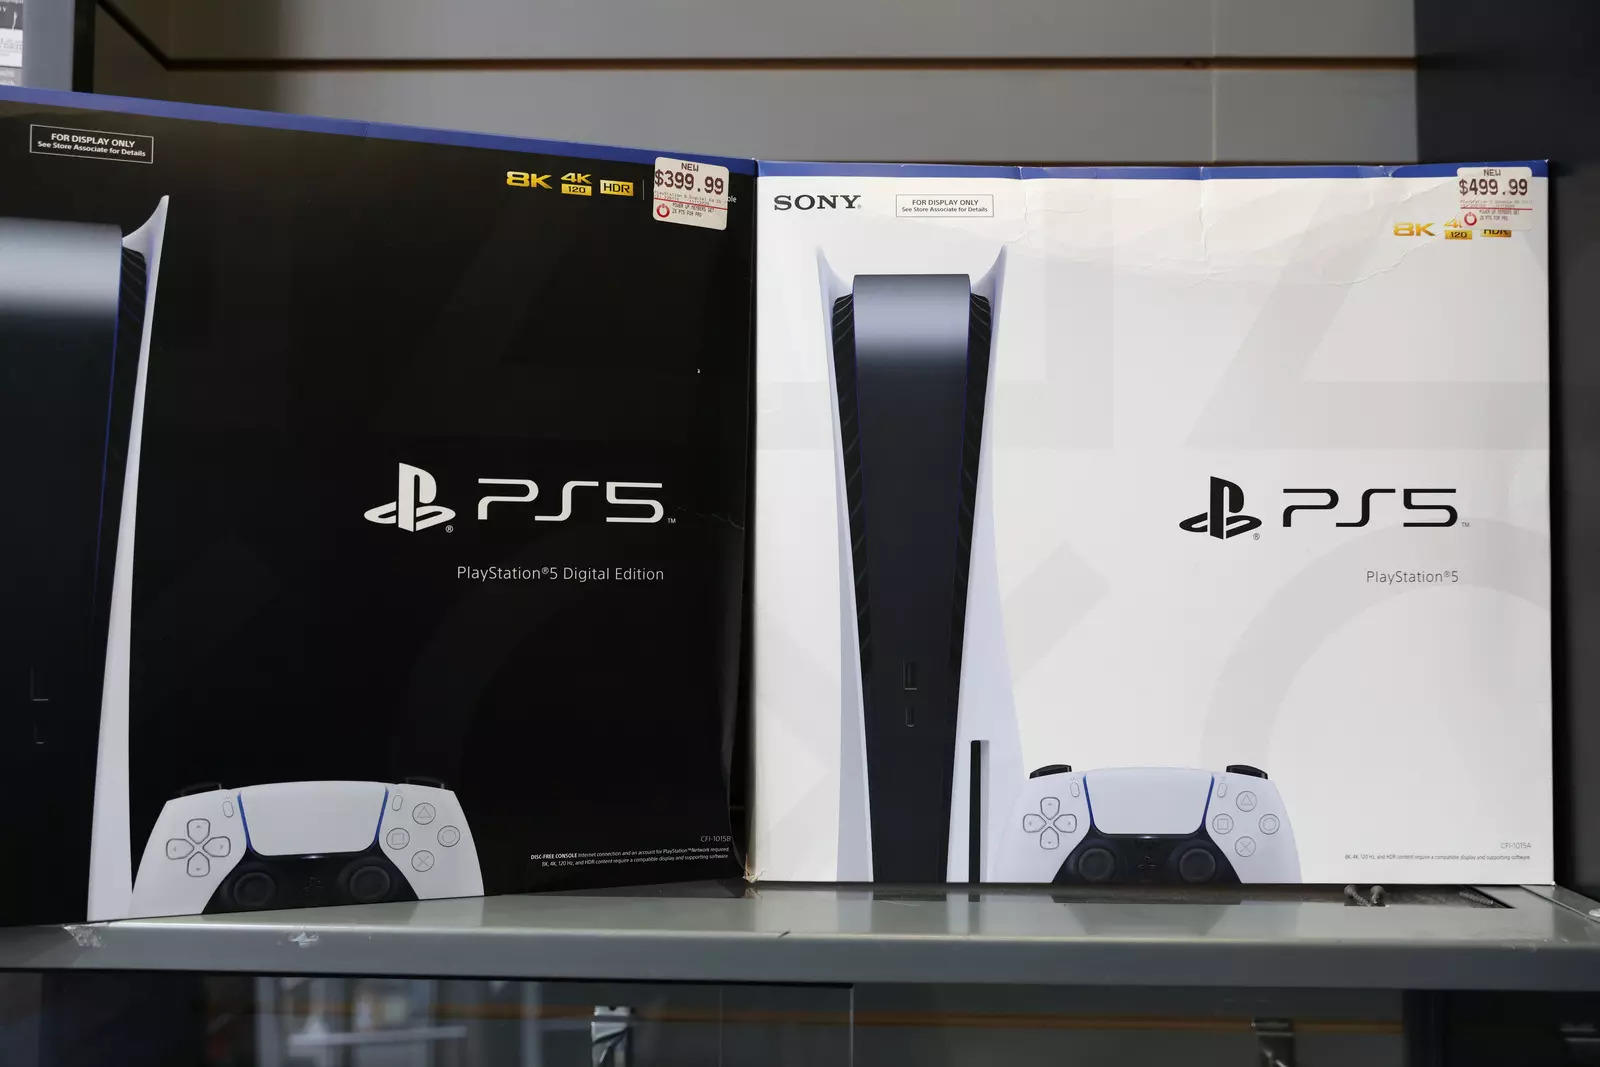 The PlayStation 5 is cheaper than ever on